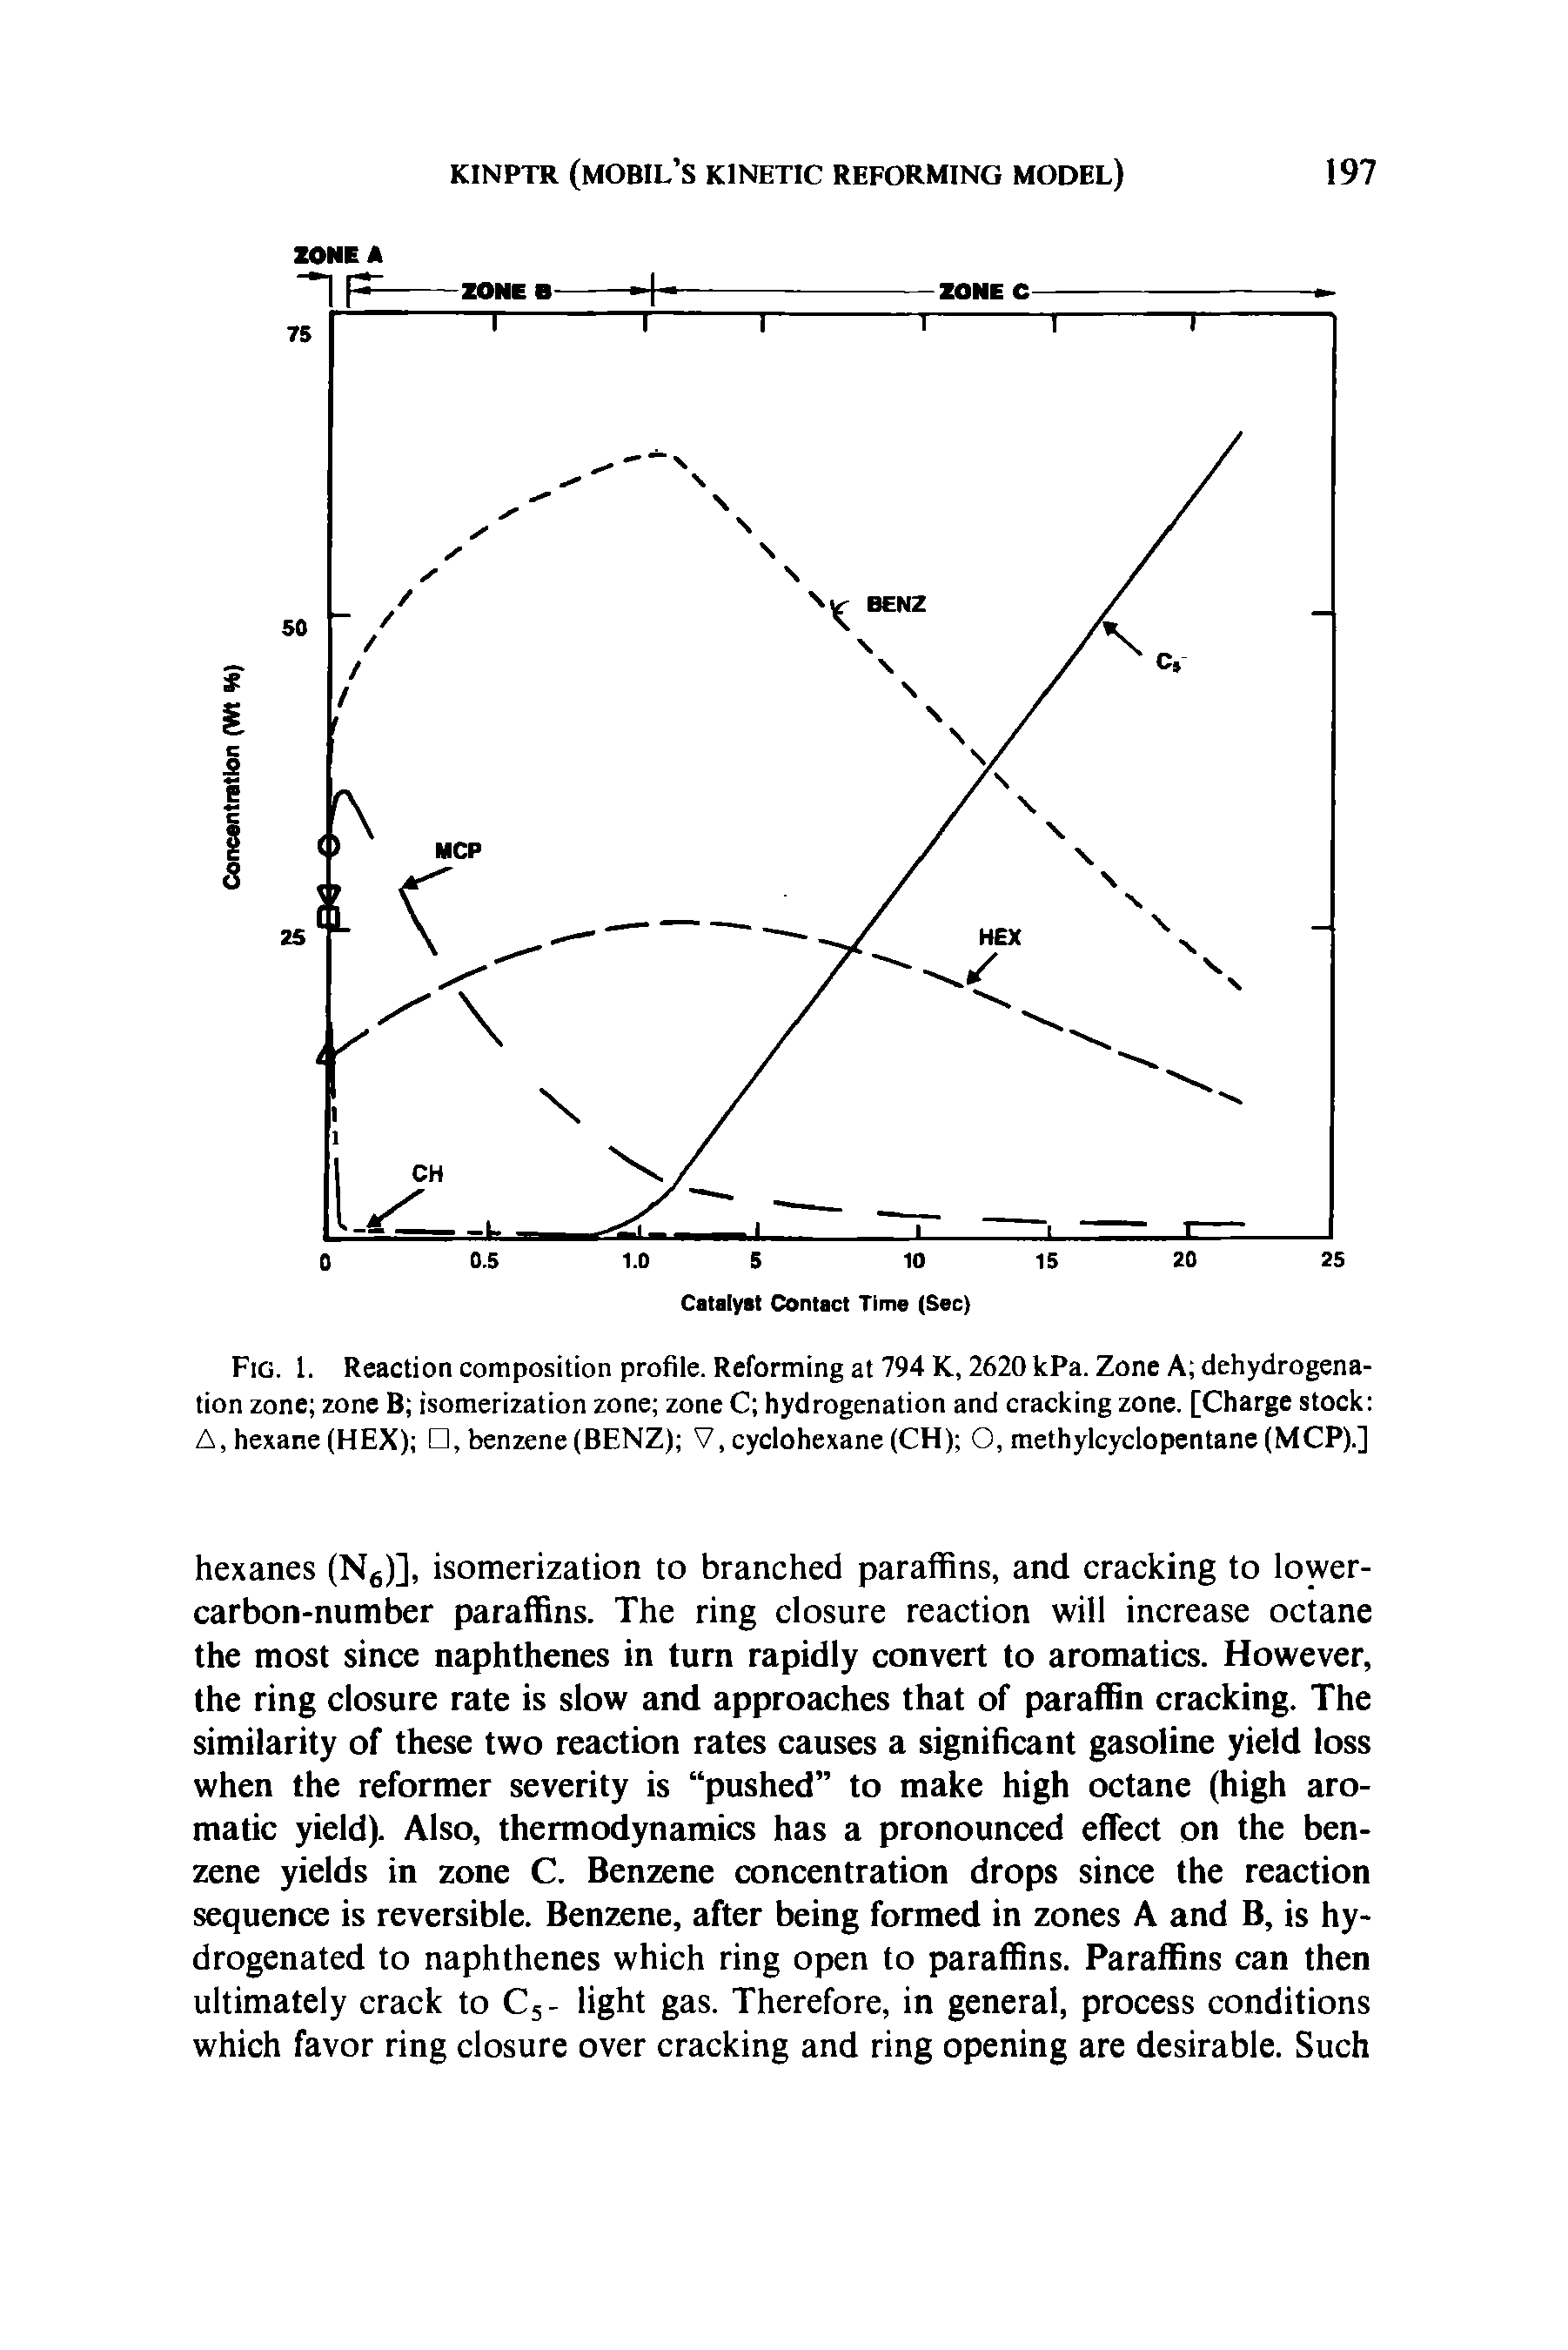 Fig. 1. Reaction composition profile. Reforming at 794 K, 2620 kPa. Zone A dehydrogenation zone zone B isomerization zone zone C hydrogenation and cracking zone. [Charge stock A, hexane (HEX) , benzene (BENZ) V, cyclohexane (CH) O, methylcyclopentane (MCP).]...